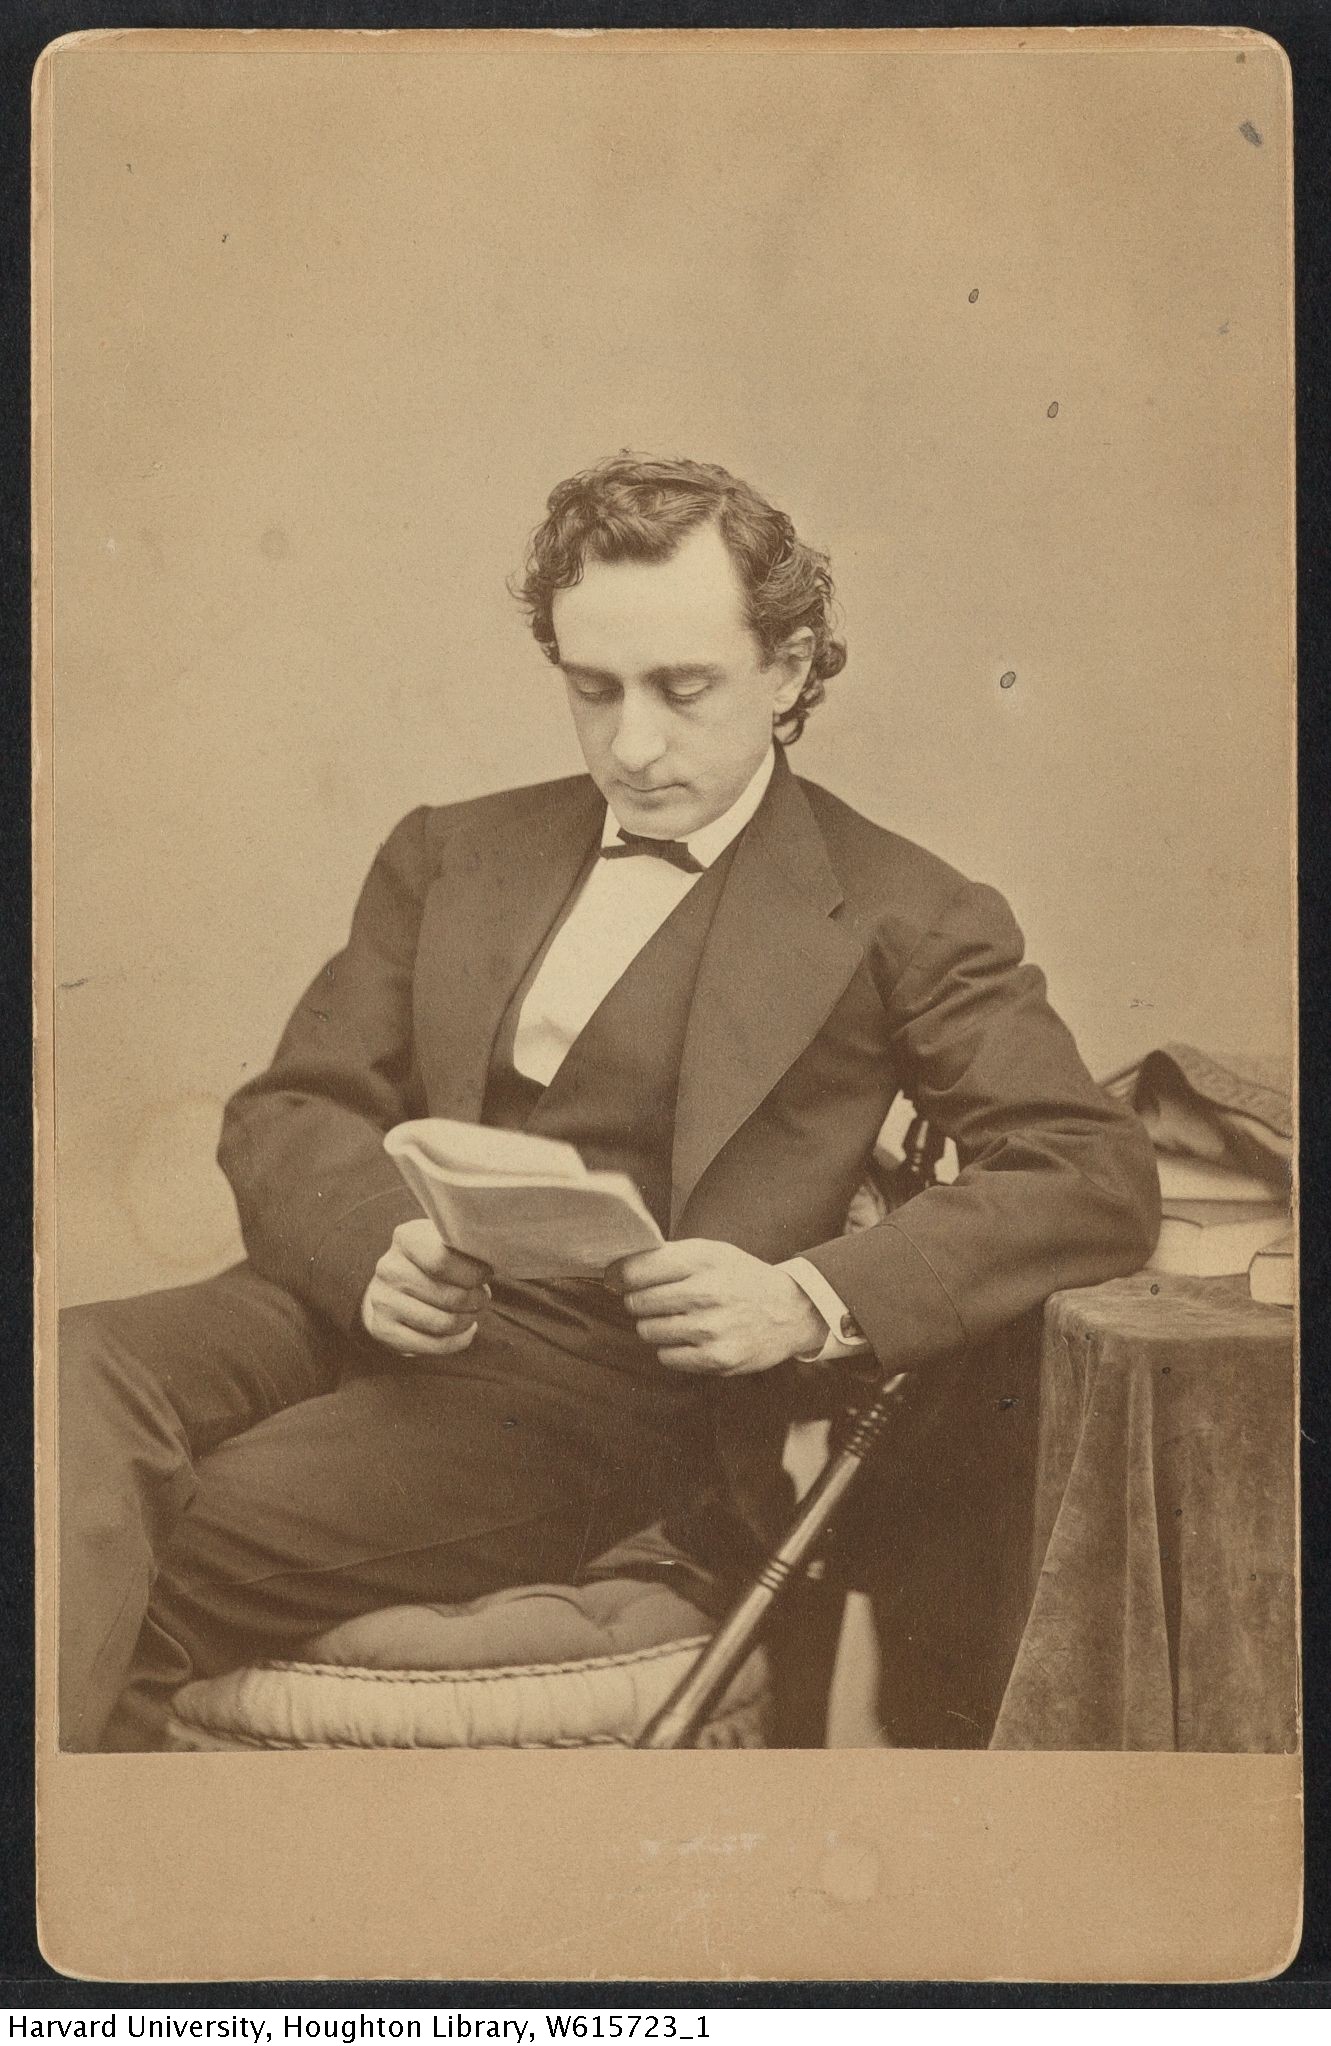 Harvard Theatre Collection - Edwin Booth TCS 1.2821